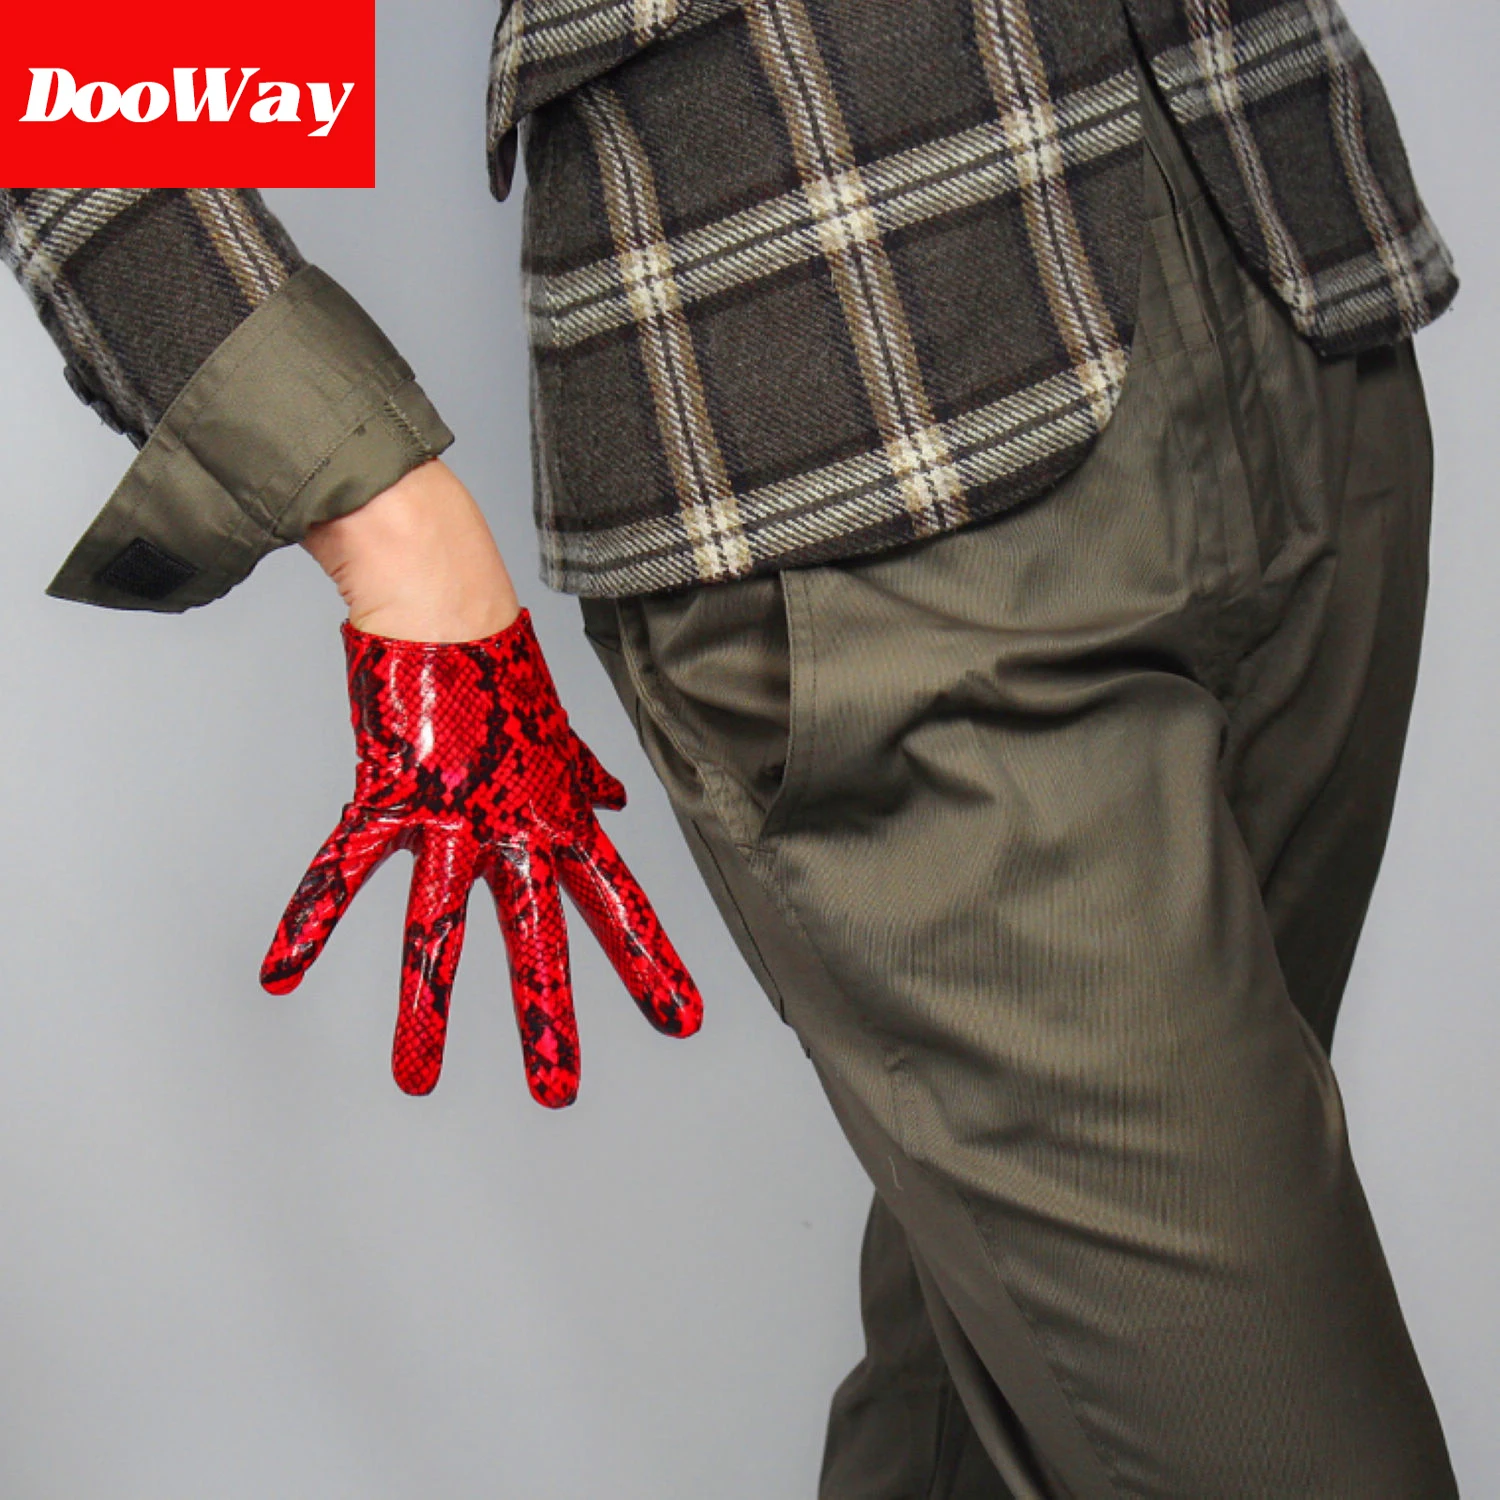 DooWay Latex Faux Leather Animal Print Women Gloves PU Wet Look Shiny Red Short Python Snake Wild Driving Race Outdoor